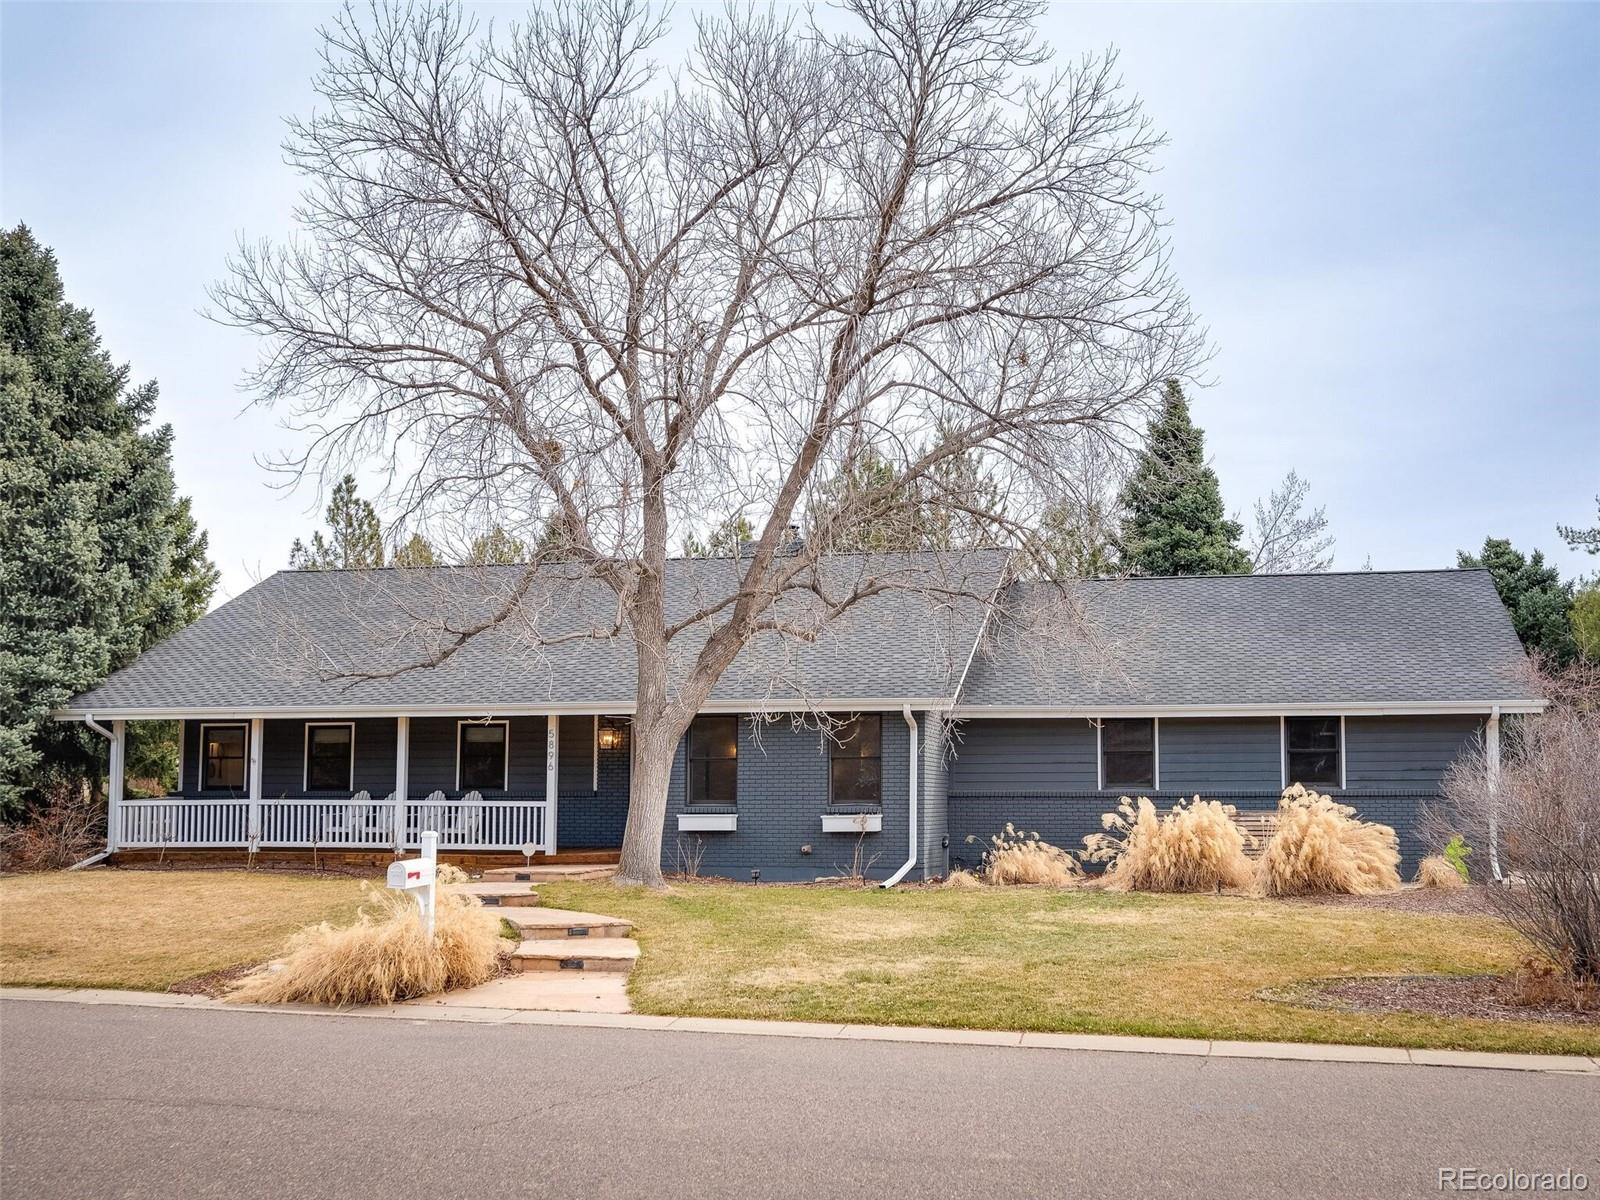 5896 s lupine drive, Littleton sold home. Closed on 2024-04-26 for $1,250,000.